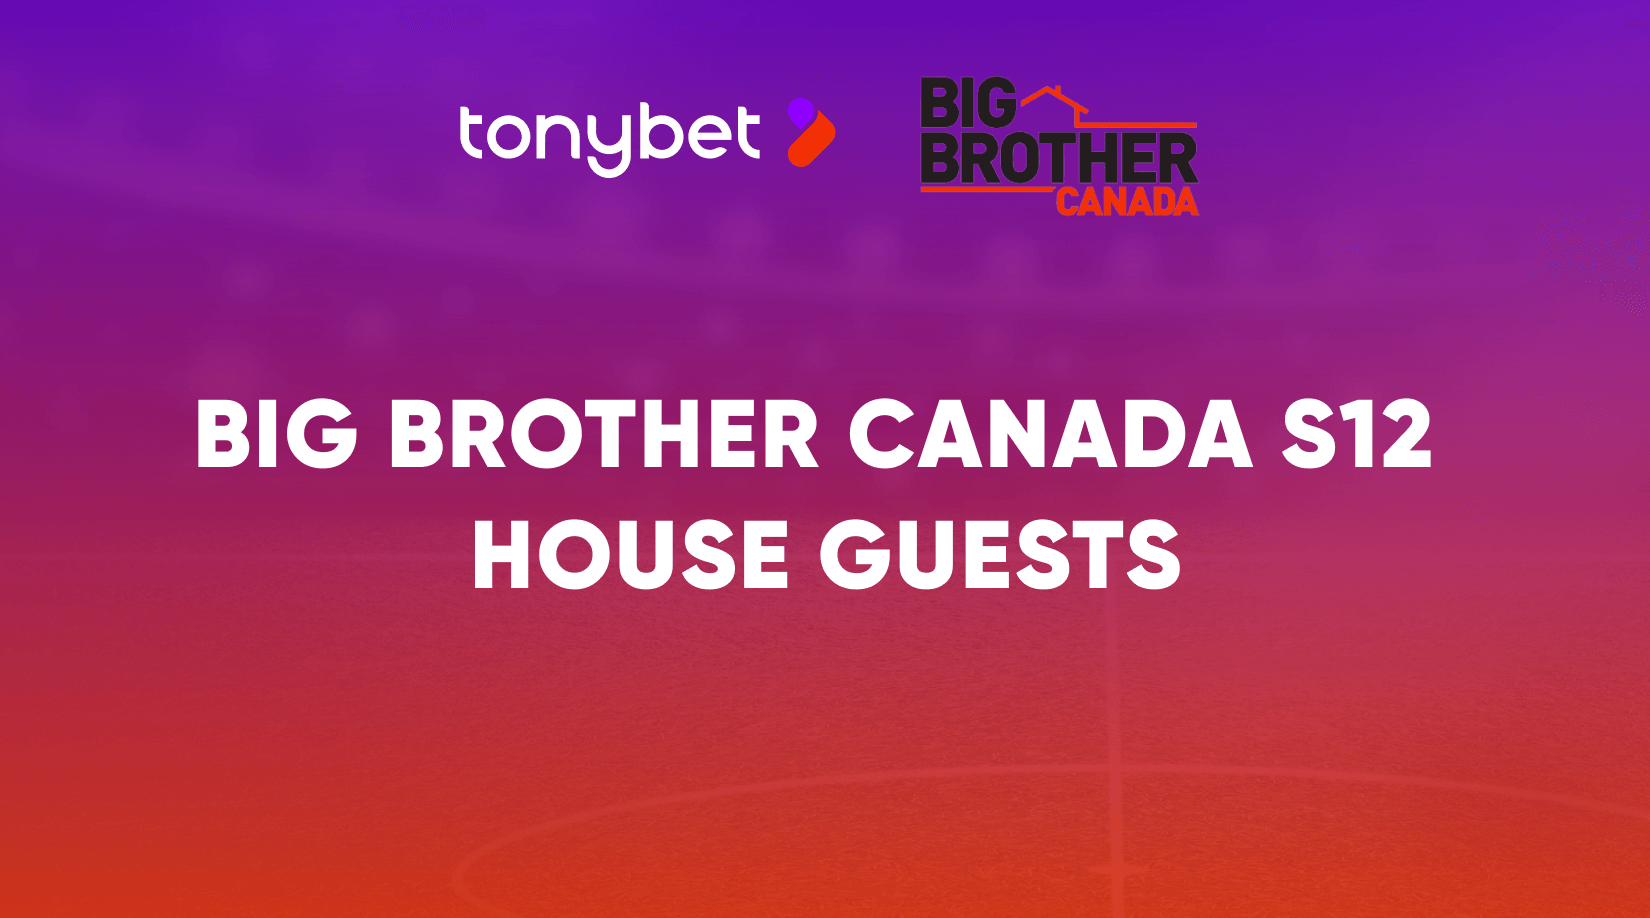 Big Brother Canada S12 – Who are the House Guests?